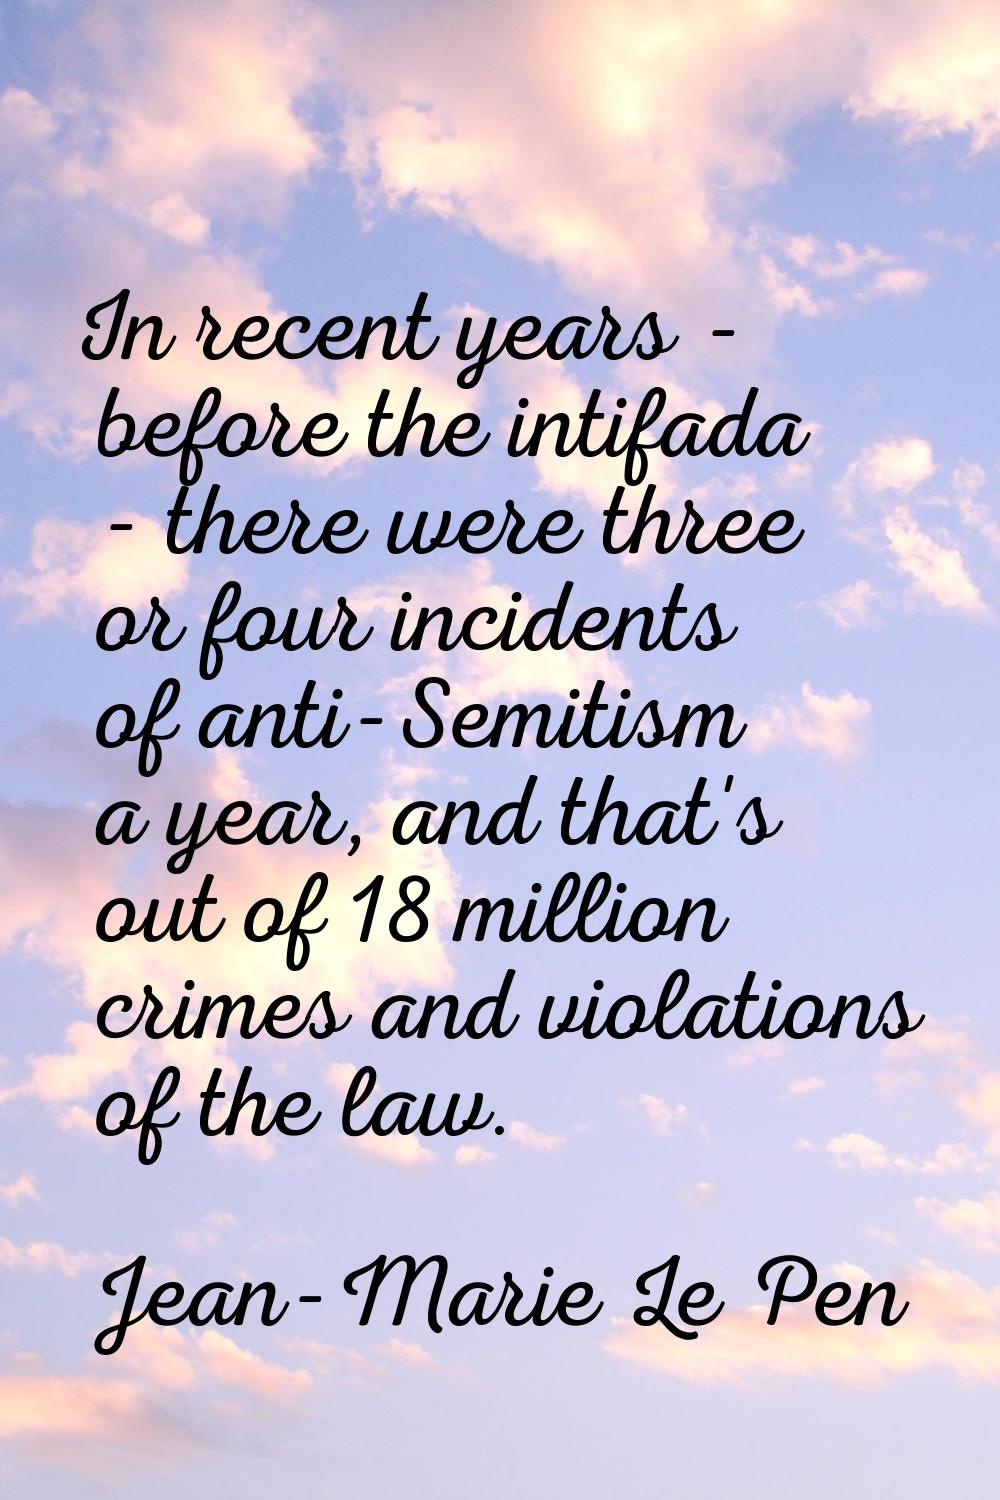 In recent years - before the intifada - there were three or four incidents of anti-Semitism a year,